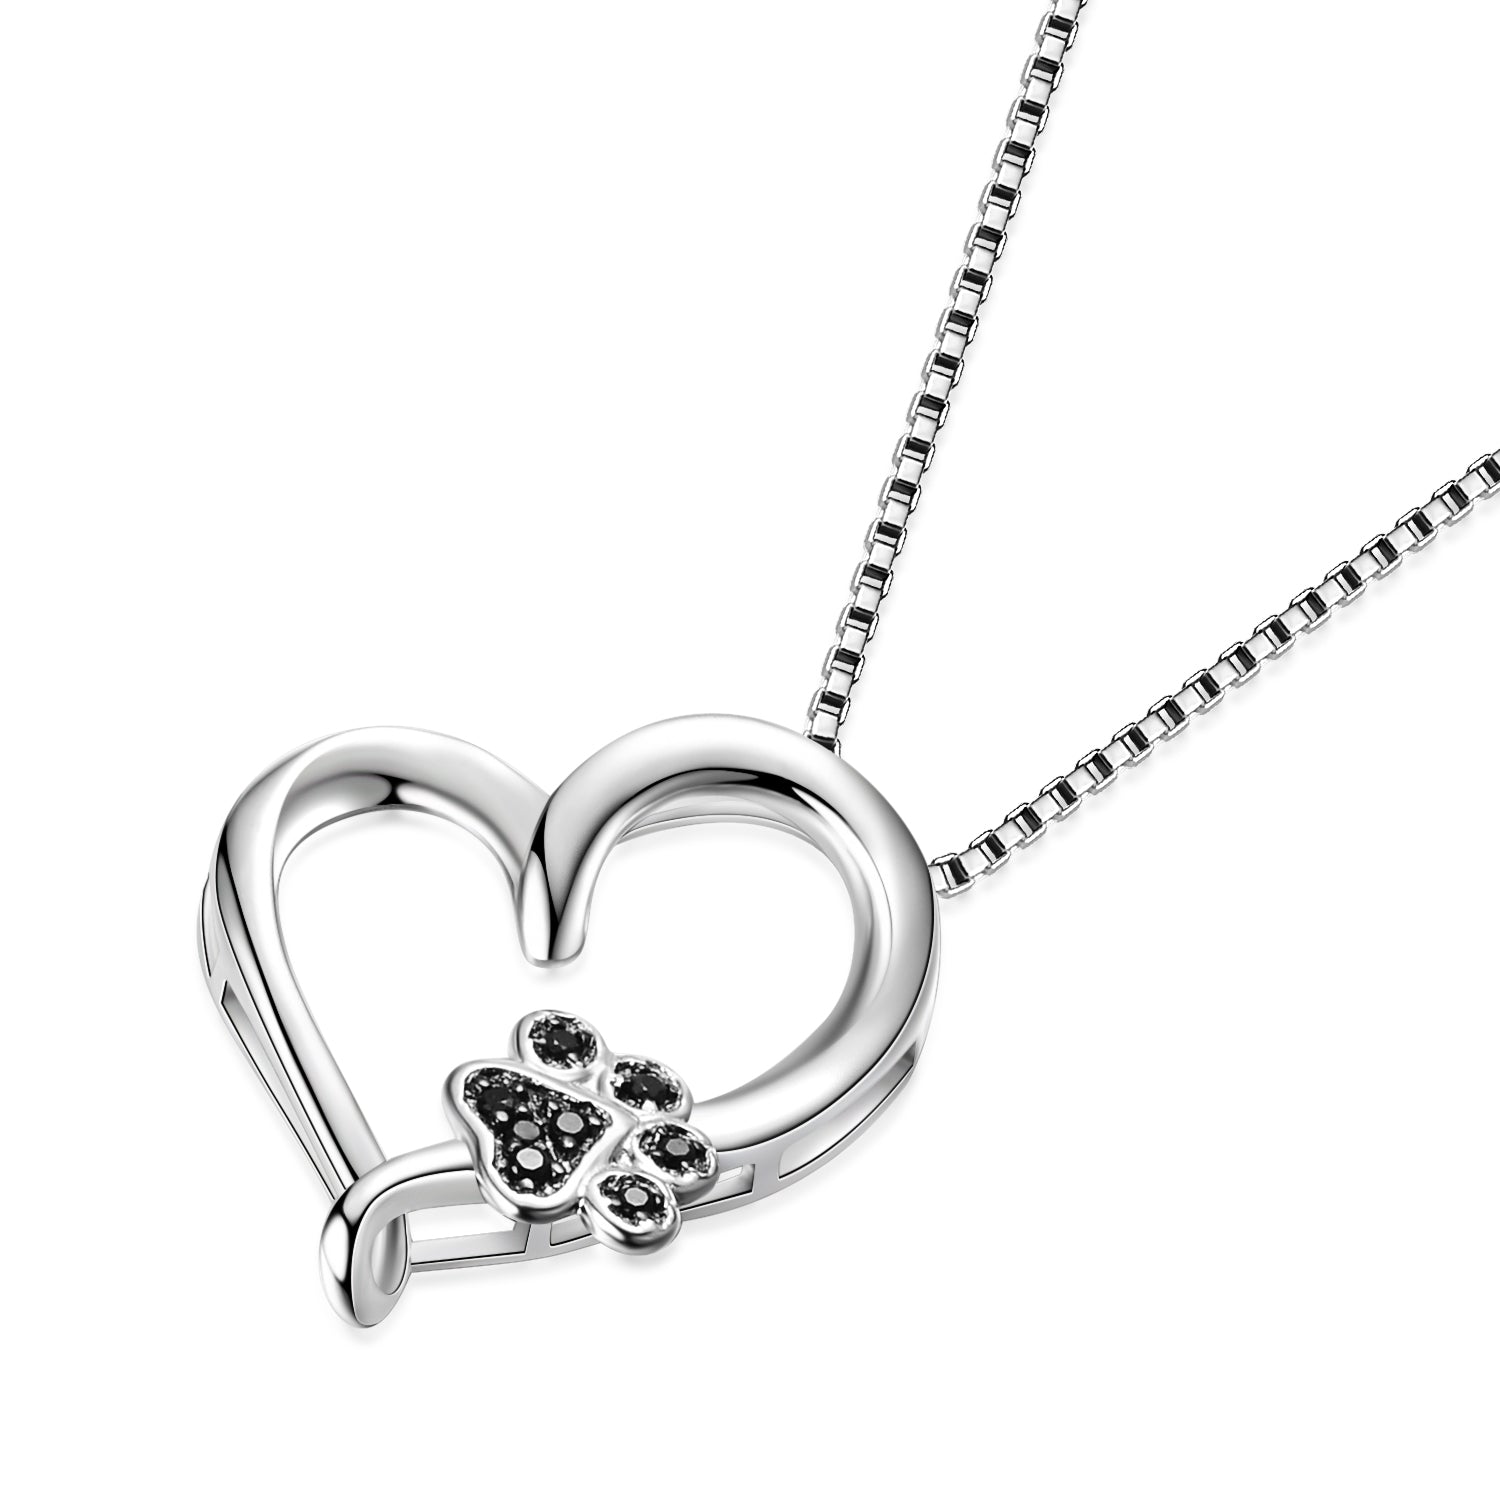 Silver Love Heart Jewelry Design Black Puppy Dog Cat Pet Paw Necklace